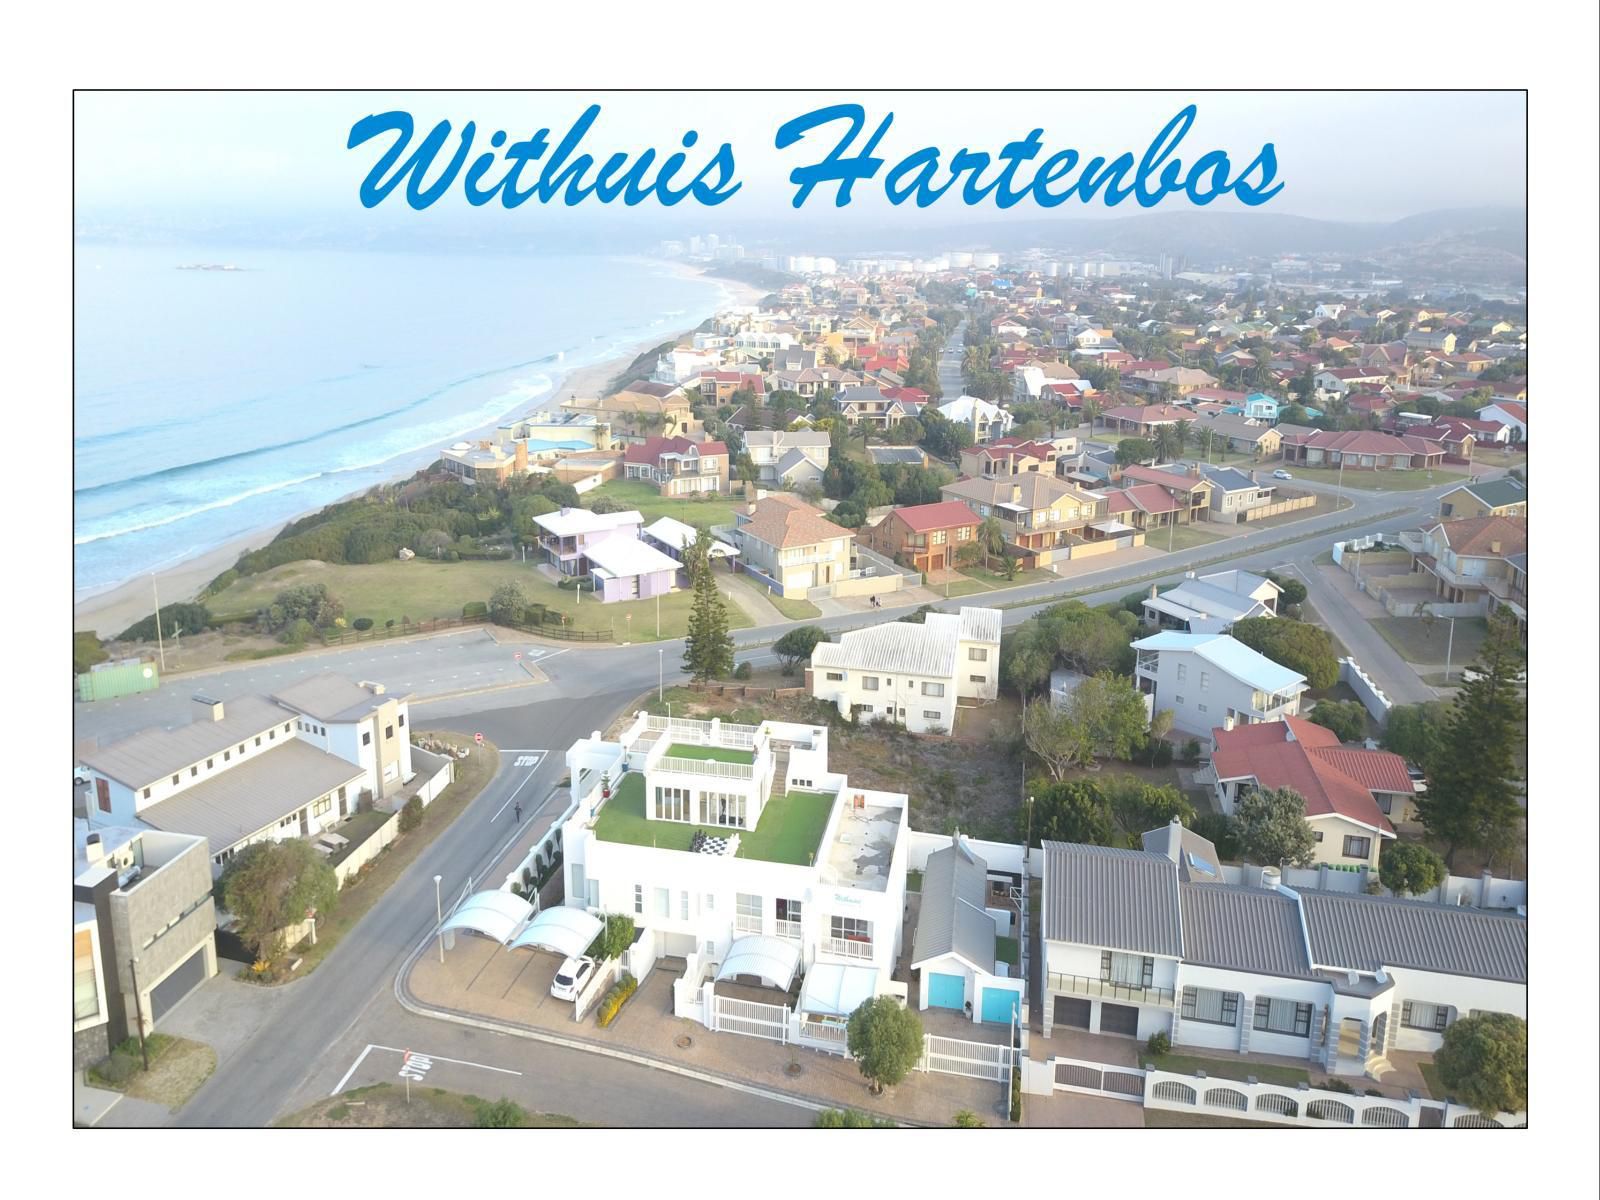 Withuis Hartenbos Hartenbos Western Cape South Africa Beach, Nature, Sand, House, Building, Architecture